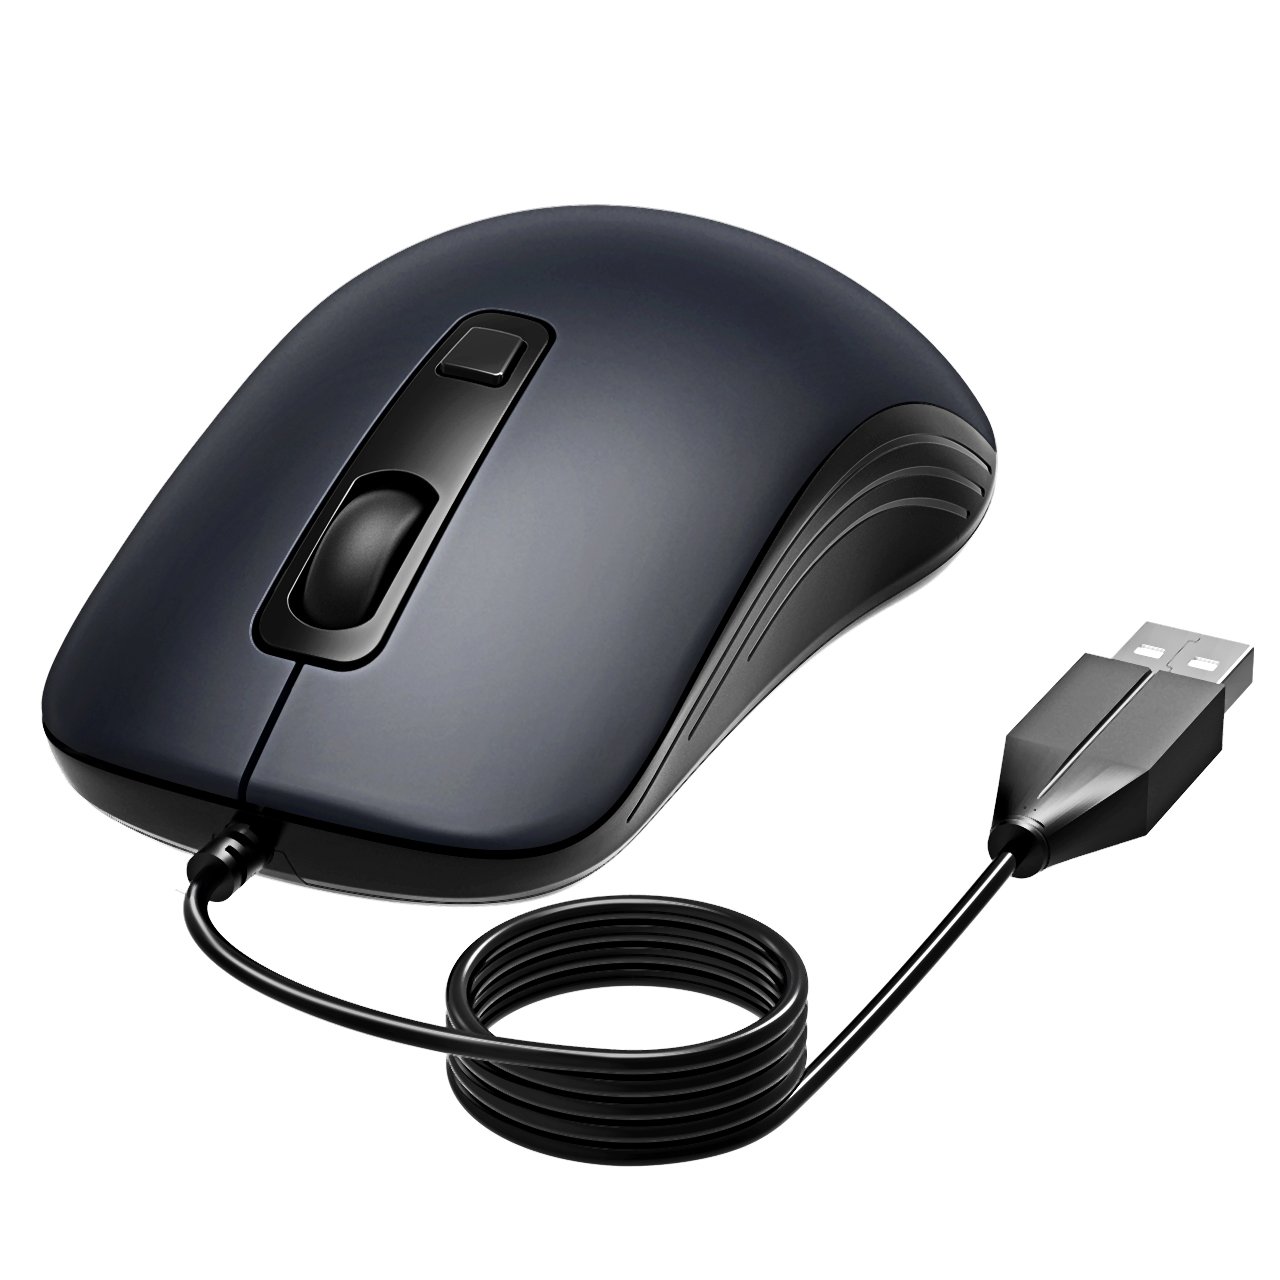 A simple image of different colored computer mice.